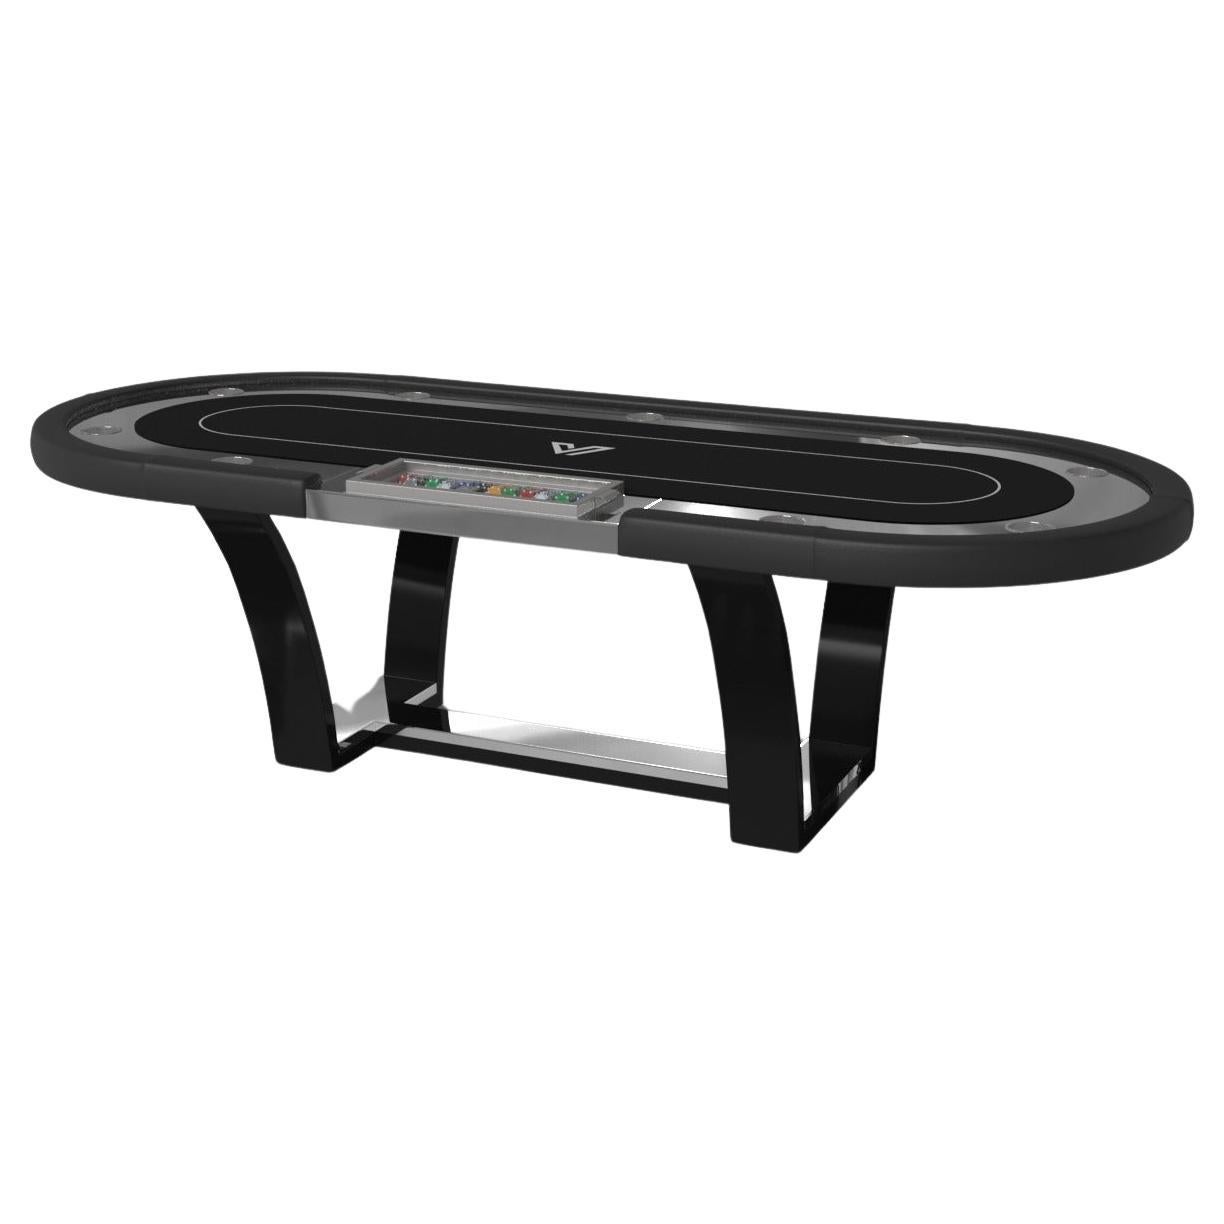 Elevate Customs Elite Poker Tables / Stainless Steel Sheet Metal in 8'8" - USA For Sale